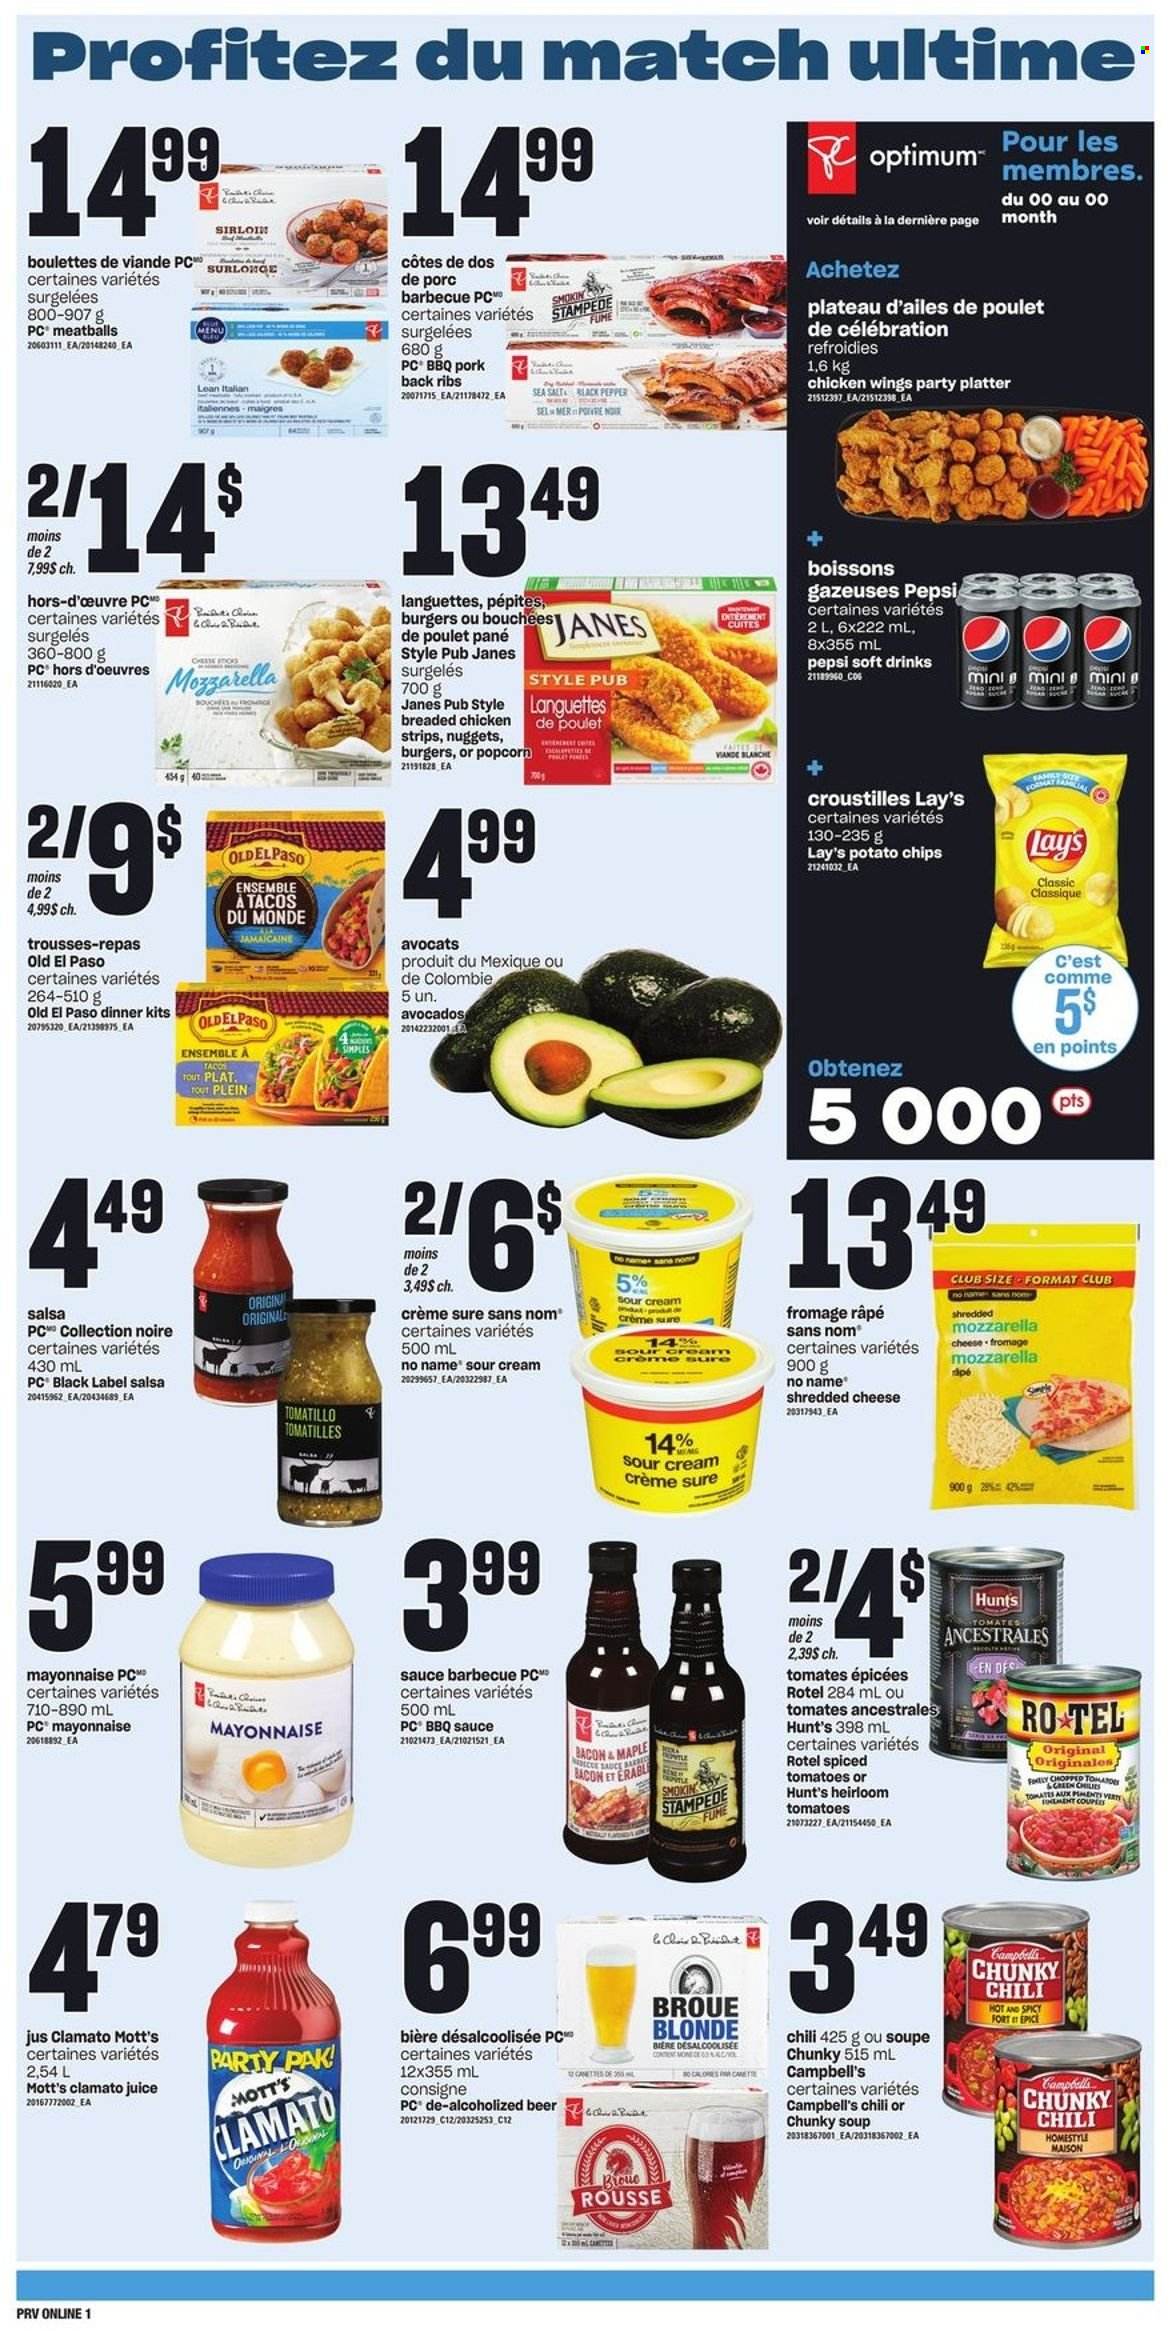 thumbnail - Provigo Flyer - January 26, 2023 - February 01, 2023 - Sales products - pie, Old El Paso, tacos, tomatillo, tomatoes, avocado, Mott's, No Name, Campbell's, meatballs, soup, nuggets, hamburger, sauce, fried chicken, dinner kit, bacon, shredded cheese, sour cream, mayonnaise, chicken wings, strips, Celebration, potato chips, chips, Lay’s, popcorn, black pepper, BBQ sauce, salsa, Pepsi, juice, Clamato, soft drink, beer, pork meat, pork ribs, pork back ribs, Sure, Optimum. Page 9.